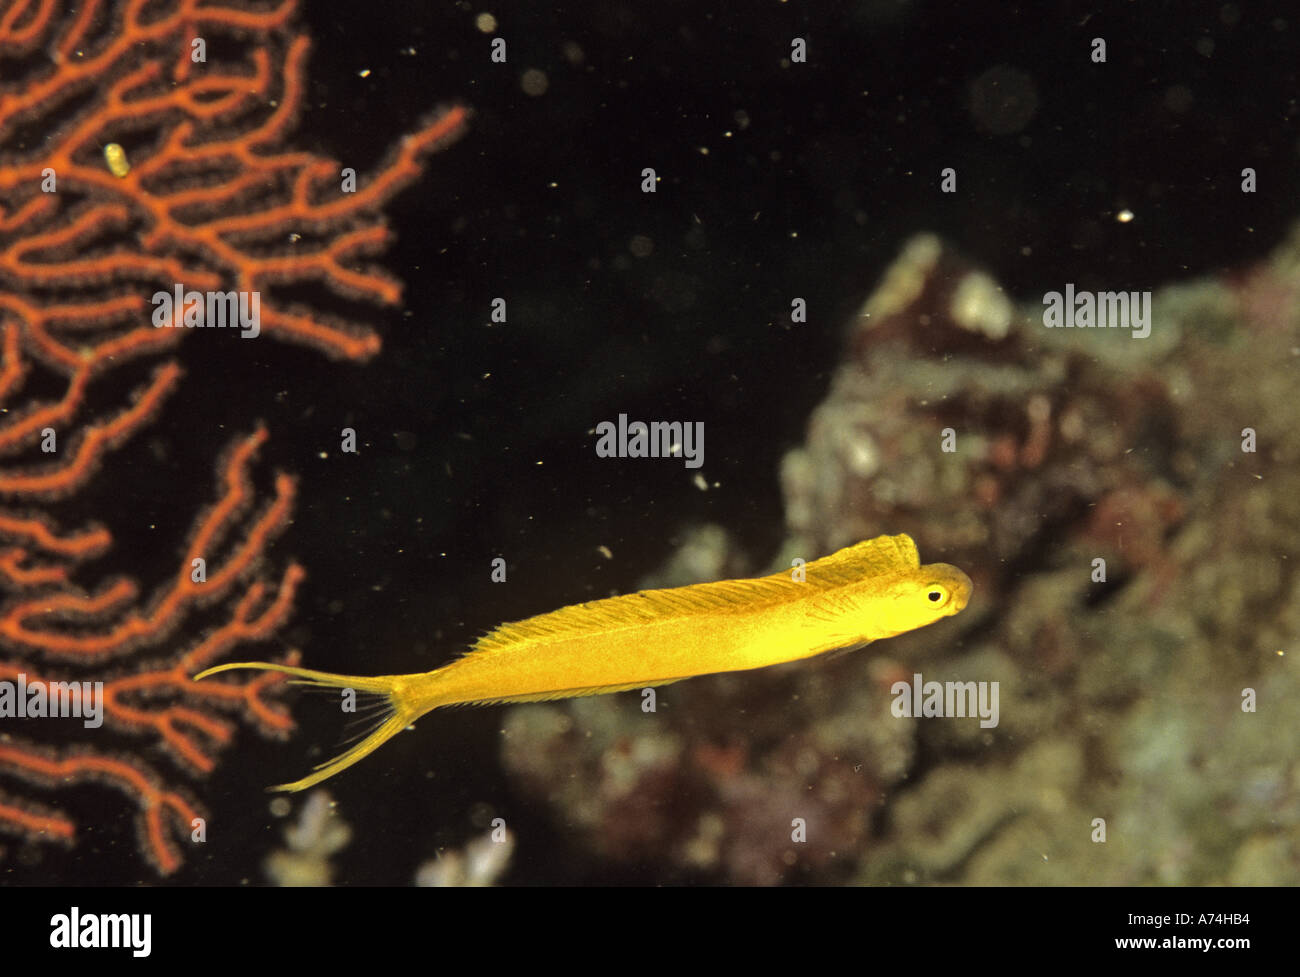 Oceania, Fiji. Yellow Poison Fang Blenny, Meiacanthus ovalauensis Endemic Stock Photo